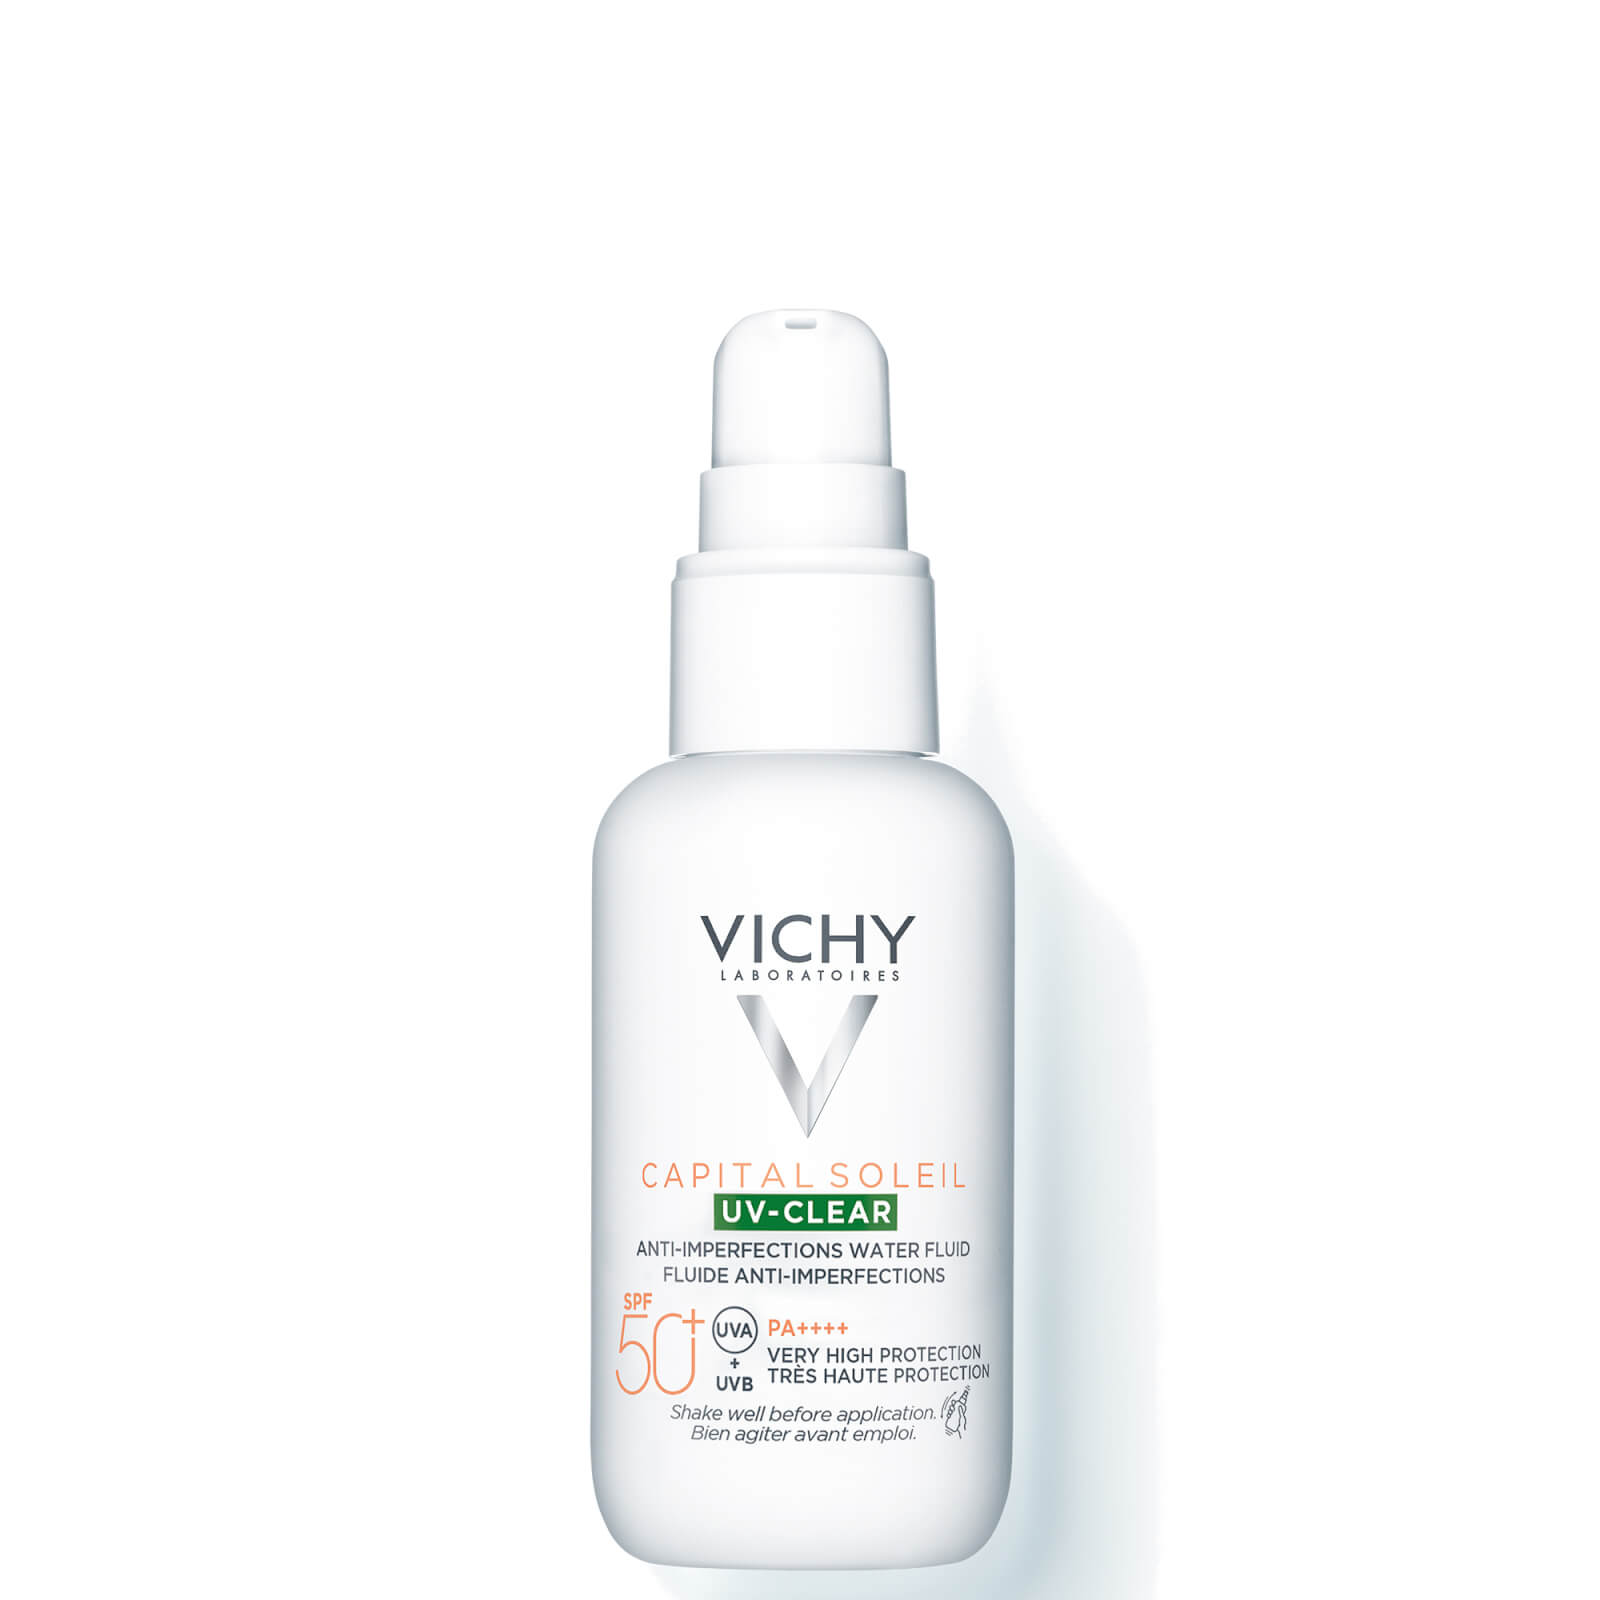 Image of Vichy Capital Soleil UV-Clear Daily Sun Protection SPF50+ with Salicylic Acid for Blemish-Prone Skin 40ml